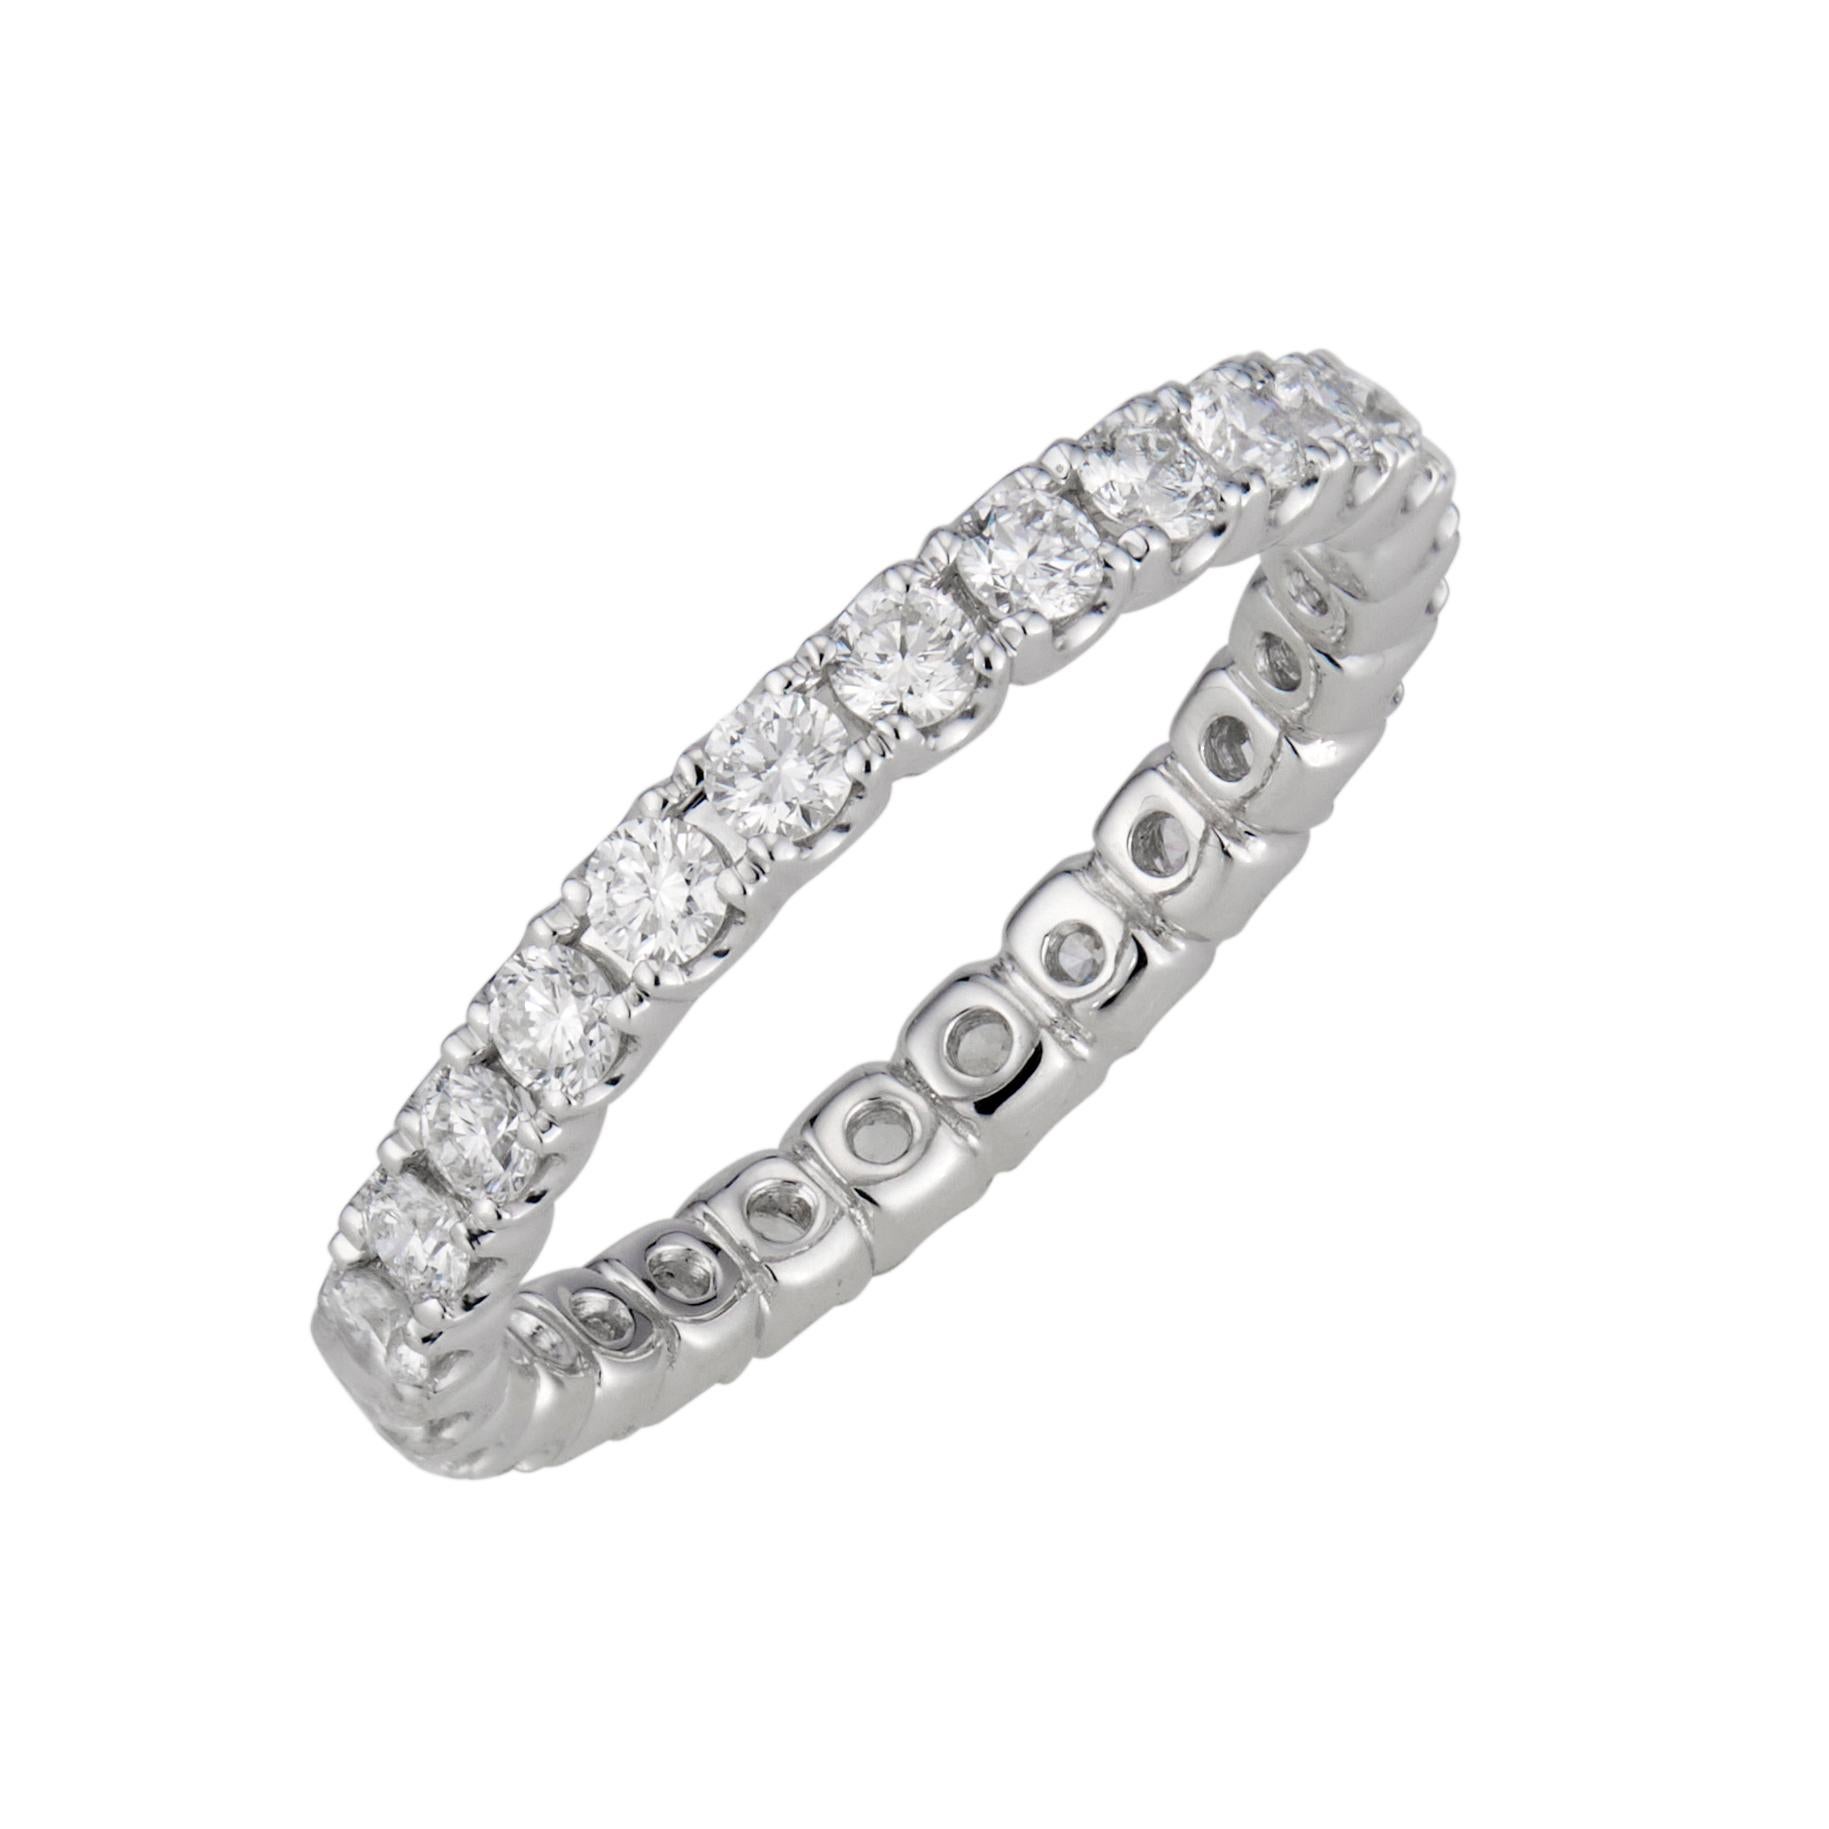 Ideal cut diamond eternity wedding band ring in platinum.  26 round brilliant cut diamonds.  This ring is not sizable.  It can be ordered in any size or metal. Designed and crafted in the Peter Suchy workshop. 

26 round brilliant cut diamonds F-G